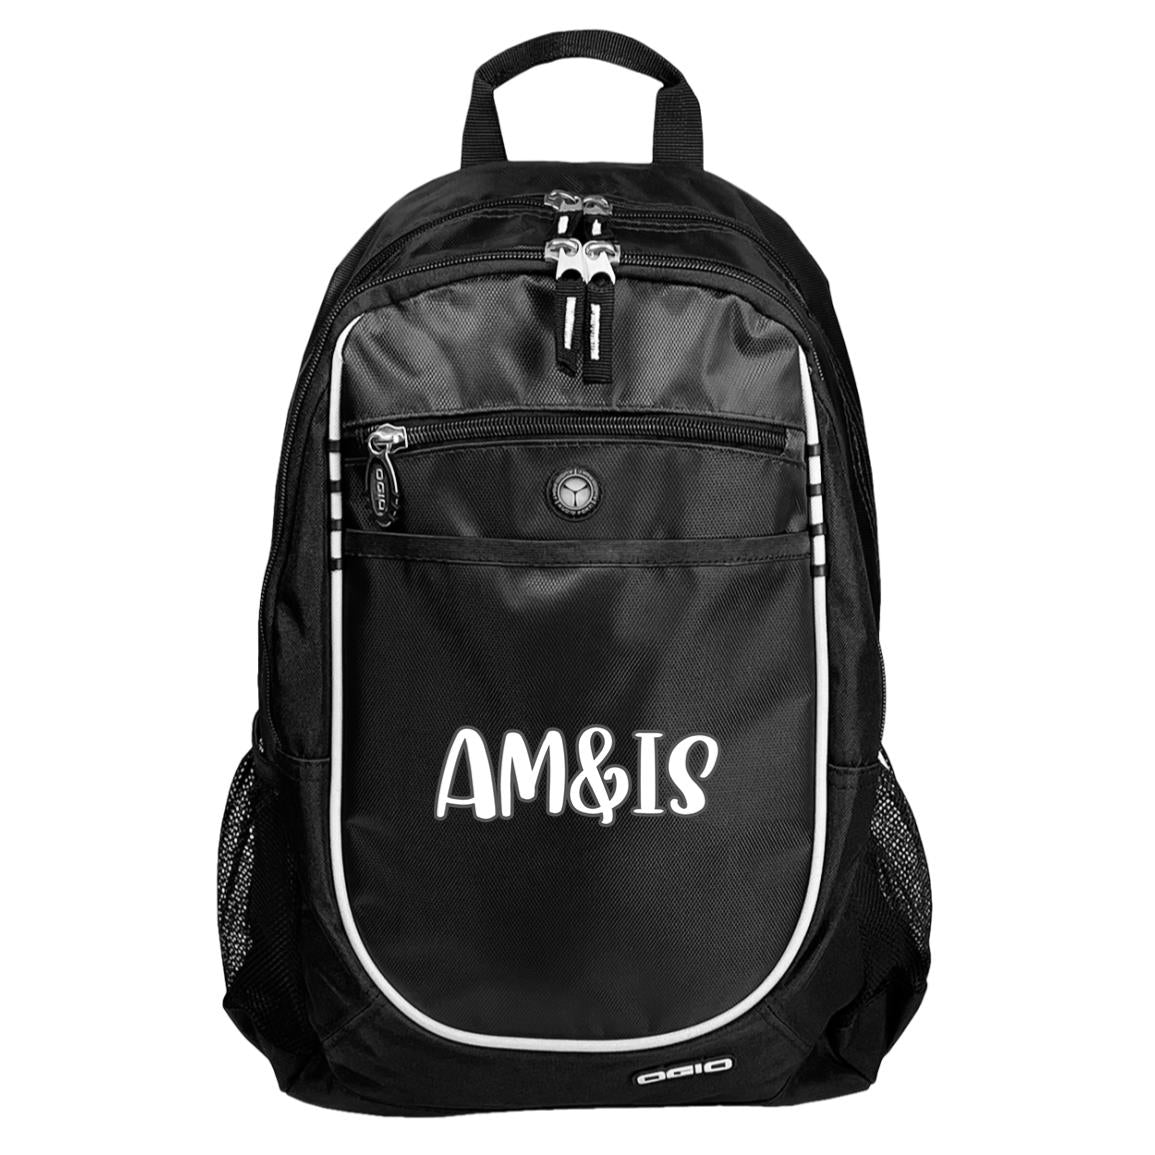 BLACK ONE SIZE AM&IS Rugged Bookbag - backpack at TFC&H Co.